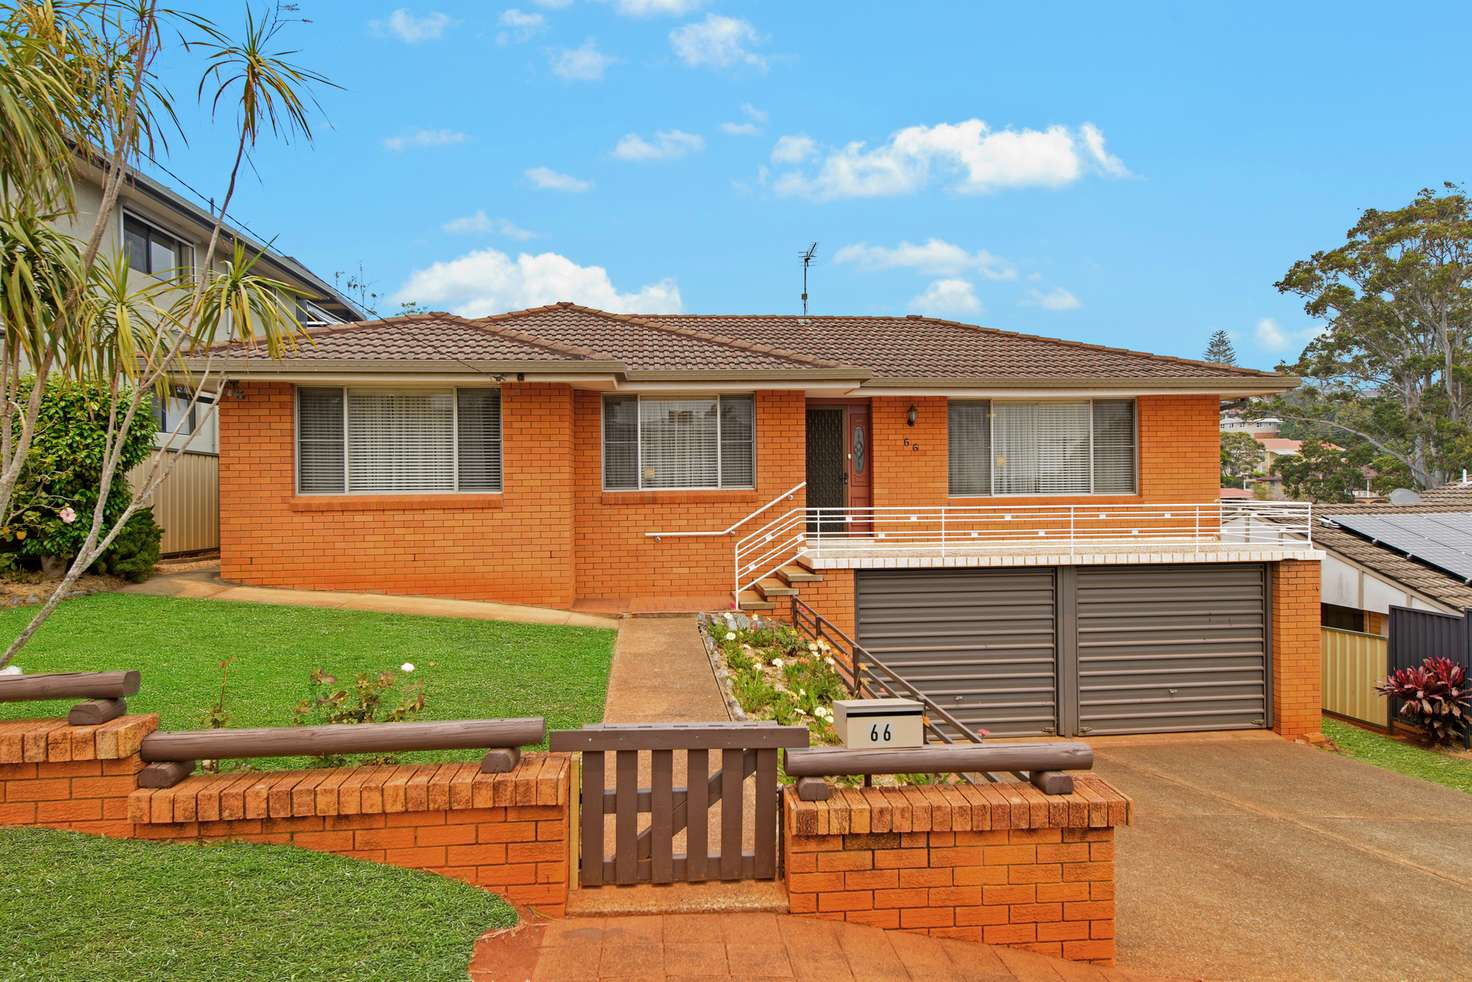 Main view of Homely house listing, 66 Savoy Street, Port Macquarie NSW 2444